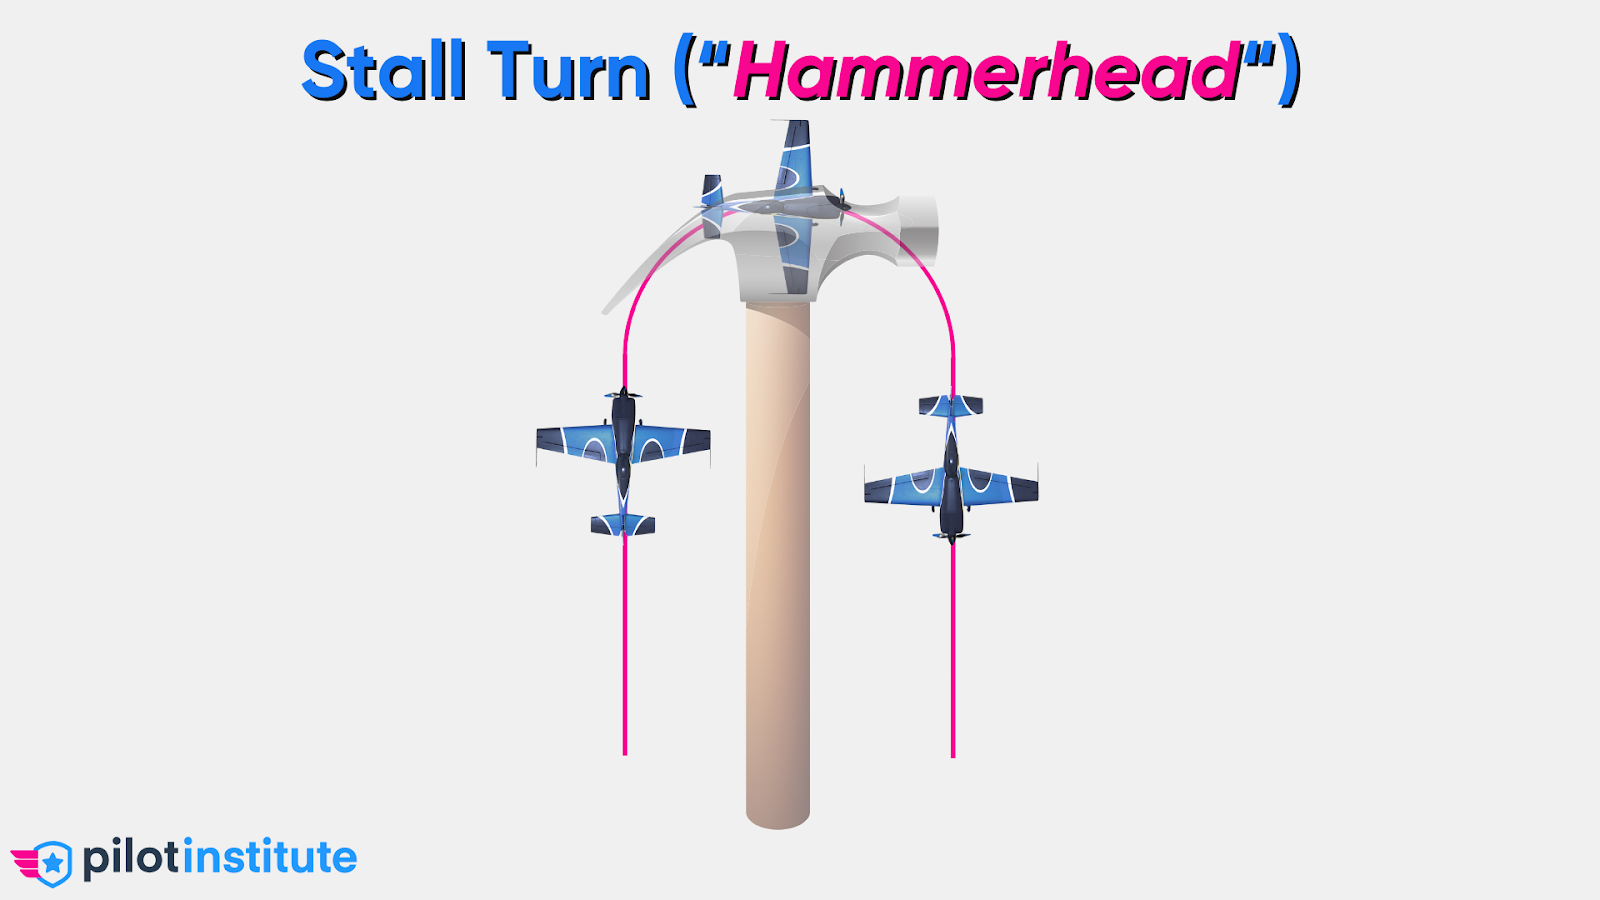 A front view of the hammerhead maneuver comparing it to the shape of a hammer.